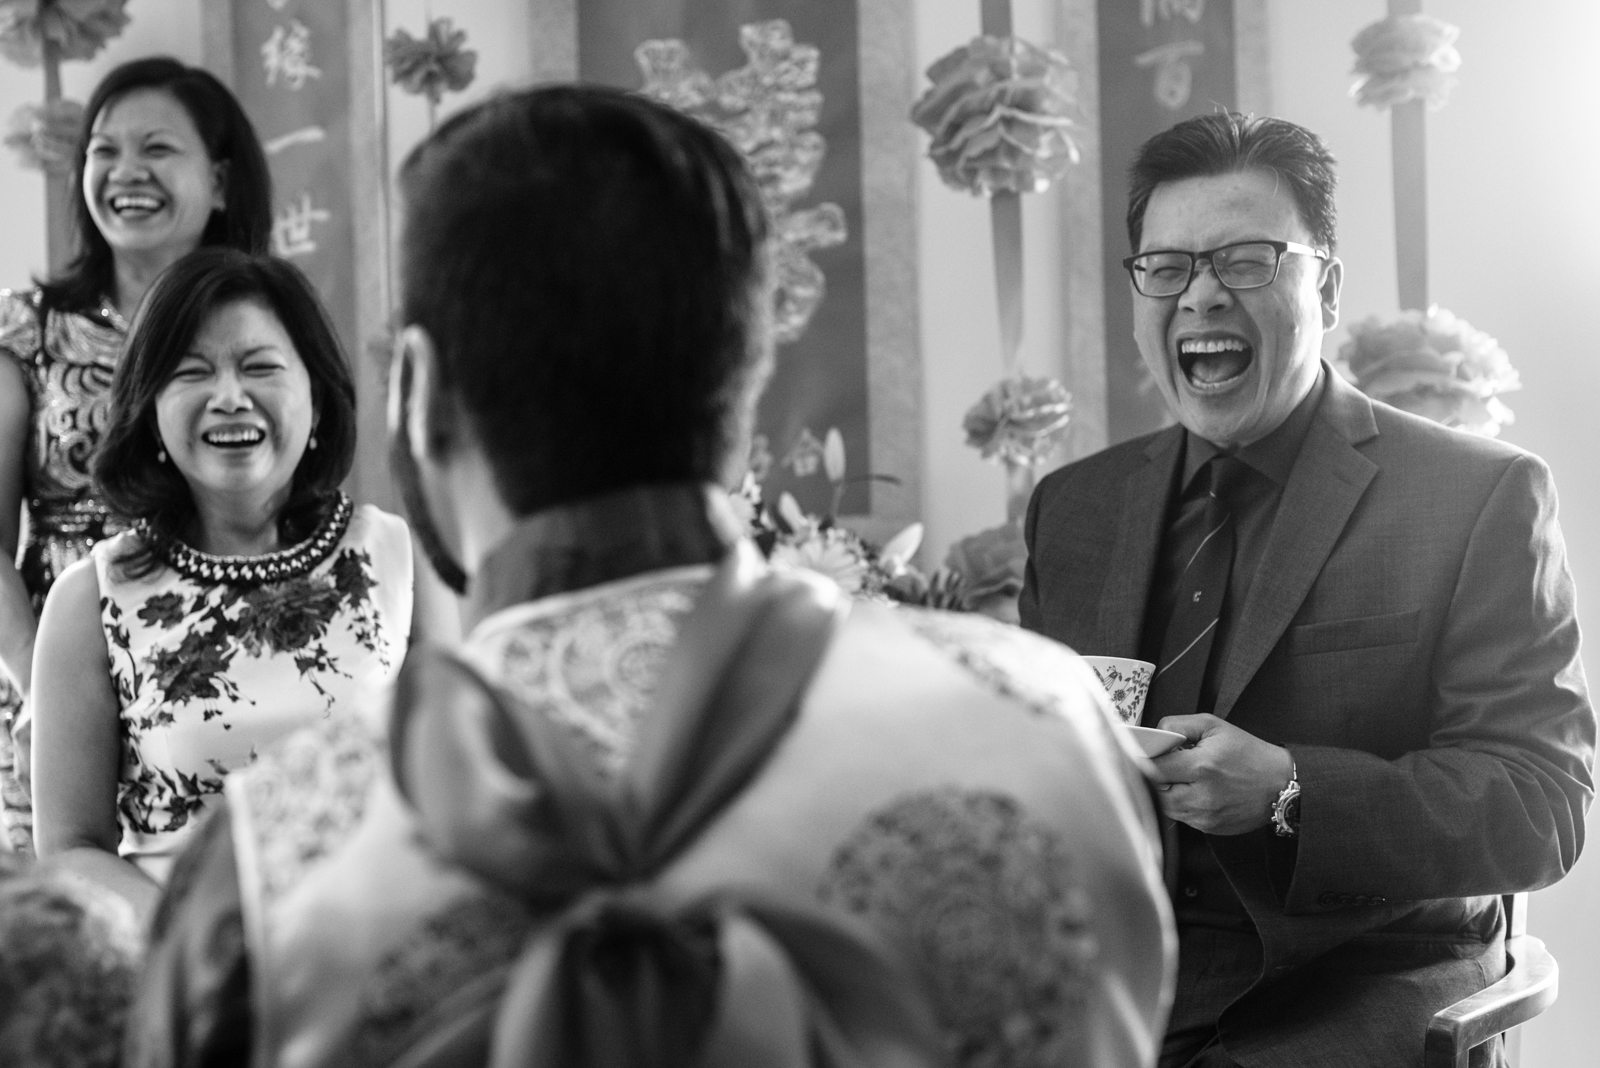 candid capture of people laughing at tea ceremony on Chinese Wedding taken by documentary wedding photographer cafa liu